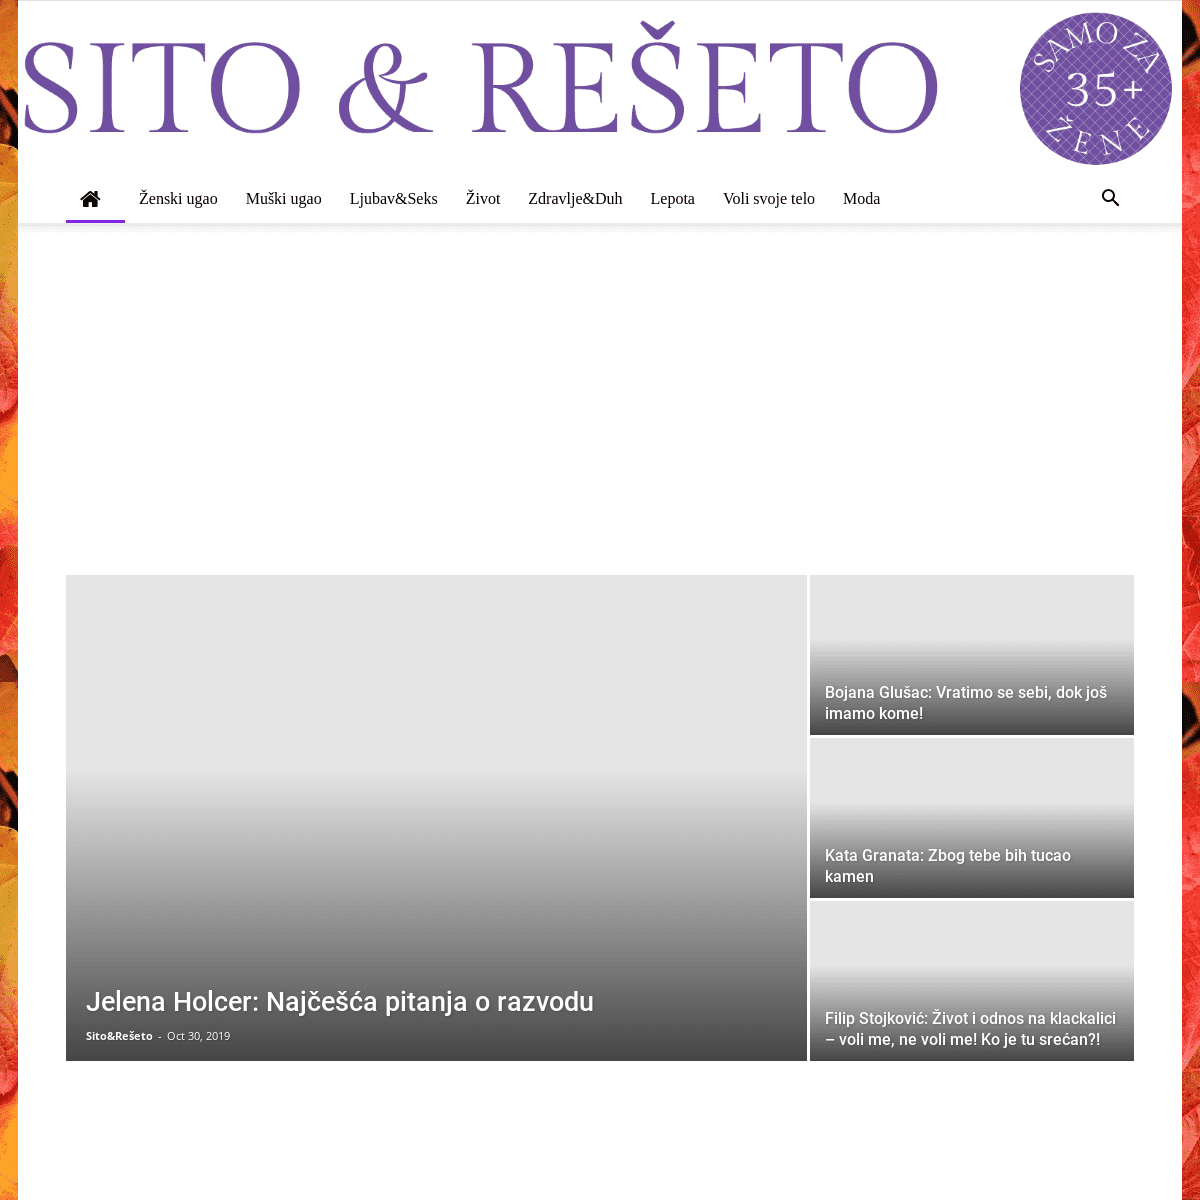 A complete backup of sitoireseto.com